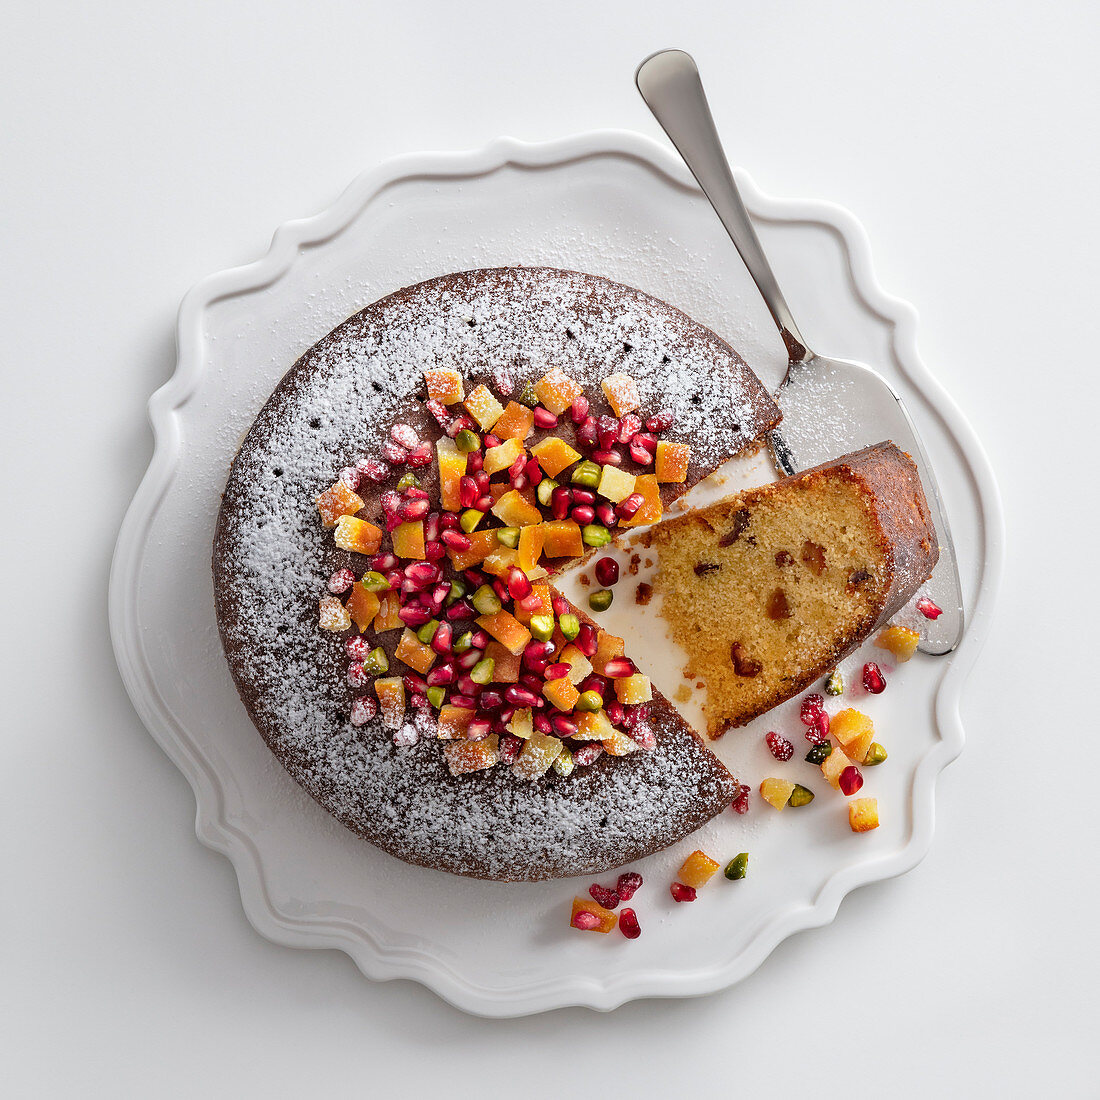 Almond cake with oranges and dates